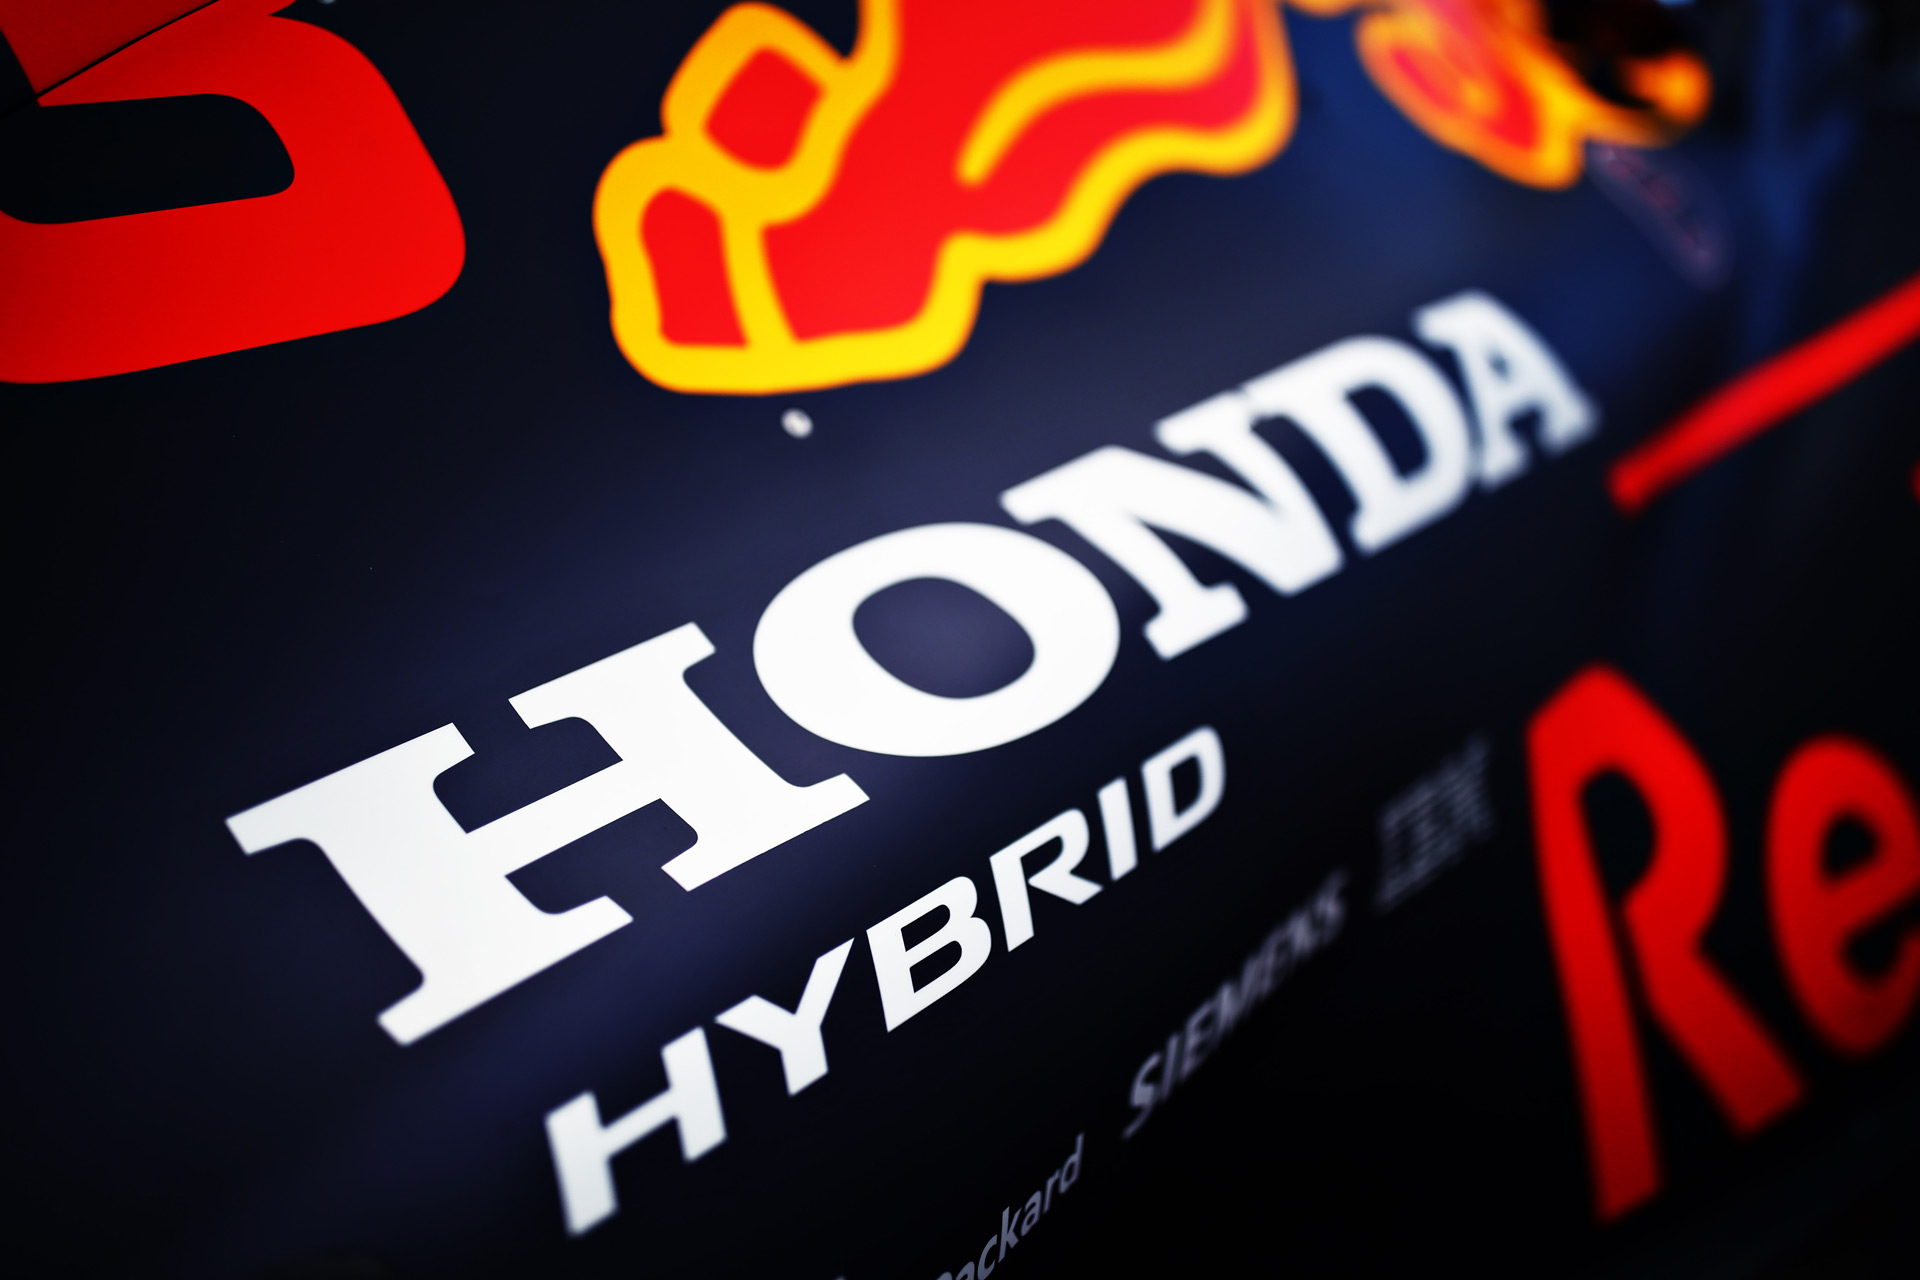 Honda Quits Formula 1 Racing To Focus On Evs And Fuel Cell Tech